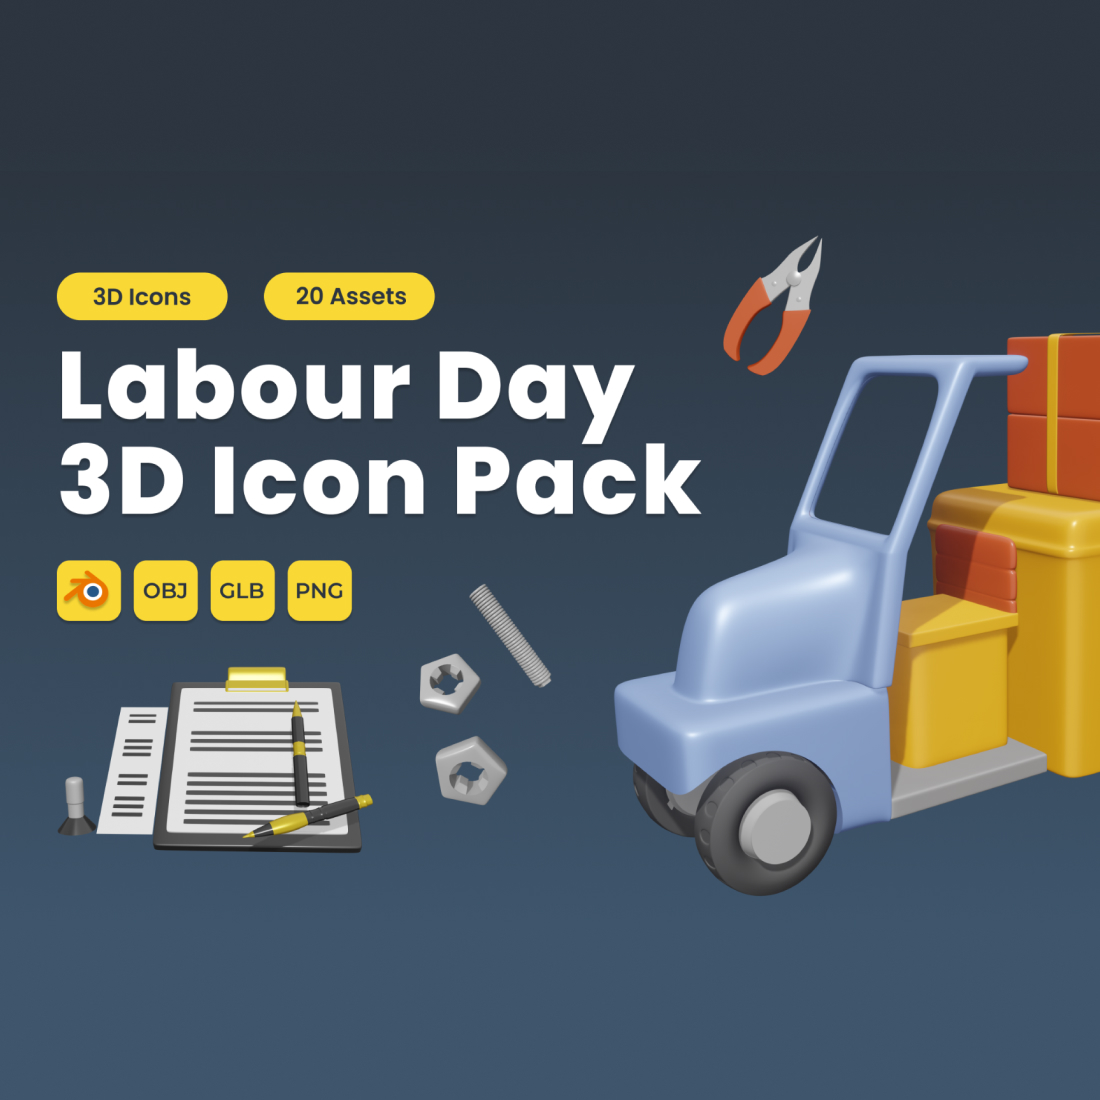 Labour Day 3D Icon Pack Vol 2 preview image.